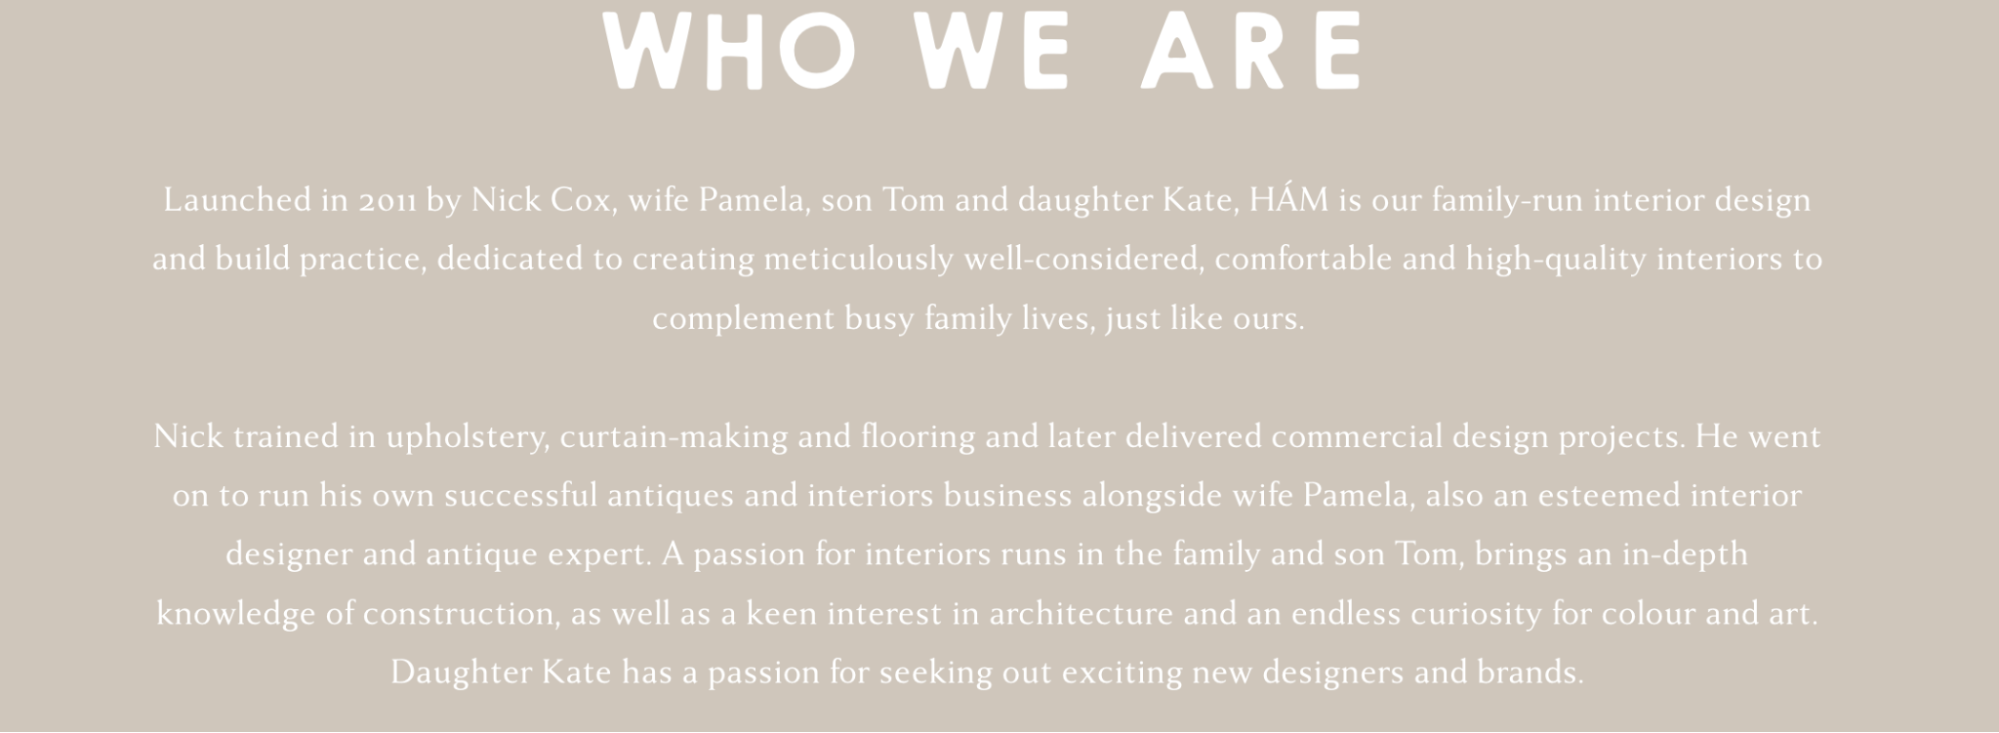 Who We Are” headline that describes the husband, wife, son, and daughter team at HÁM Interiors.